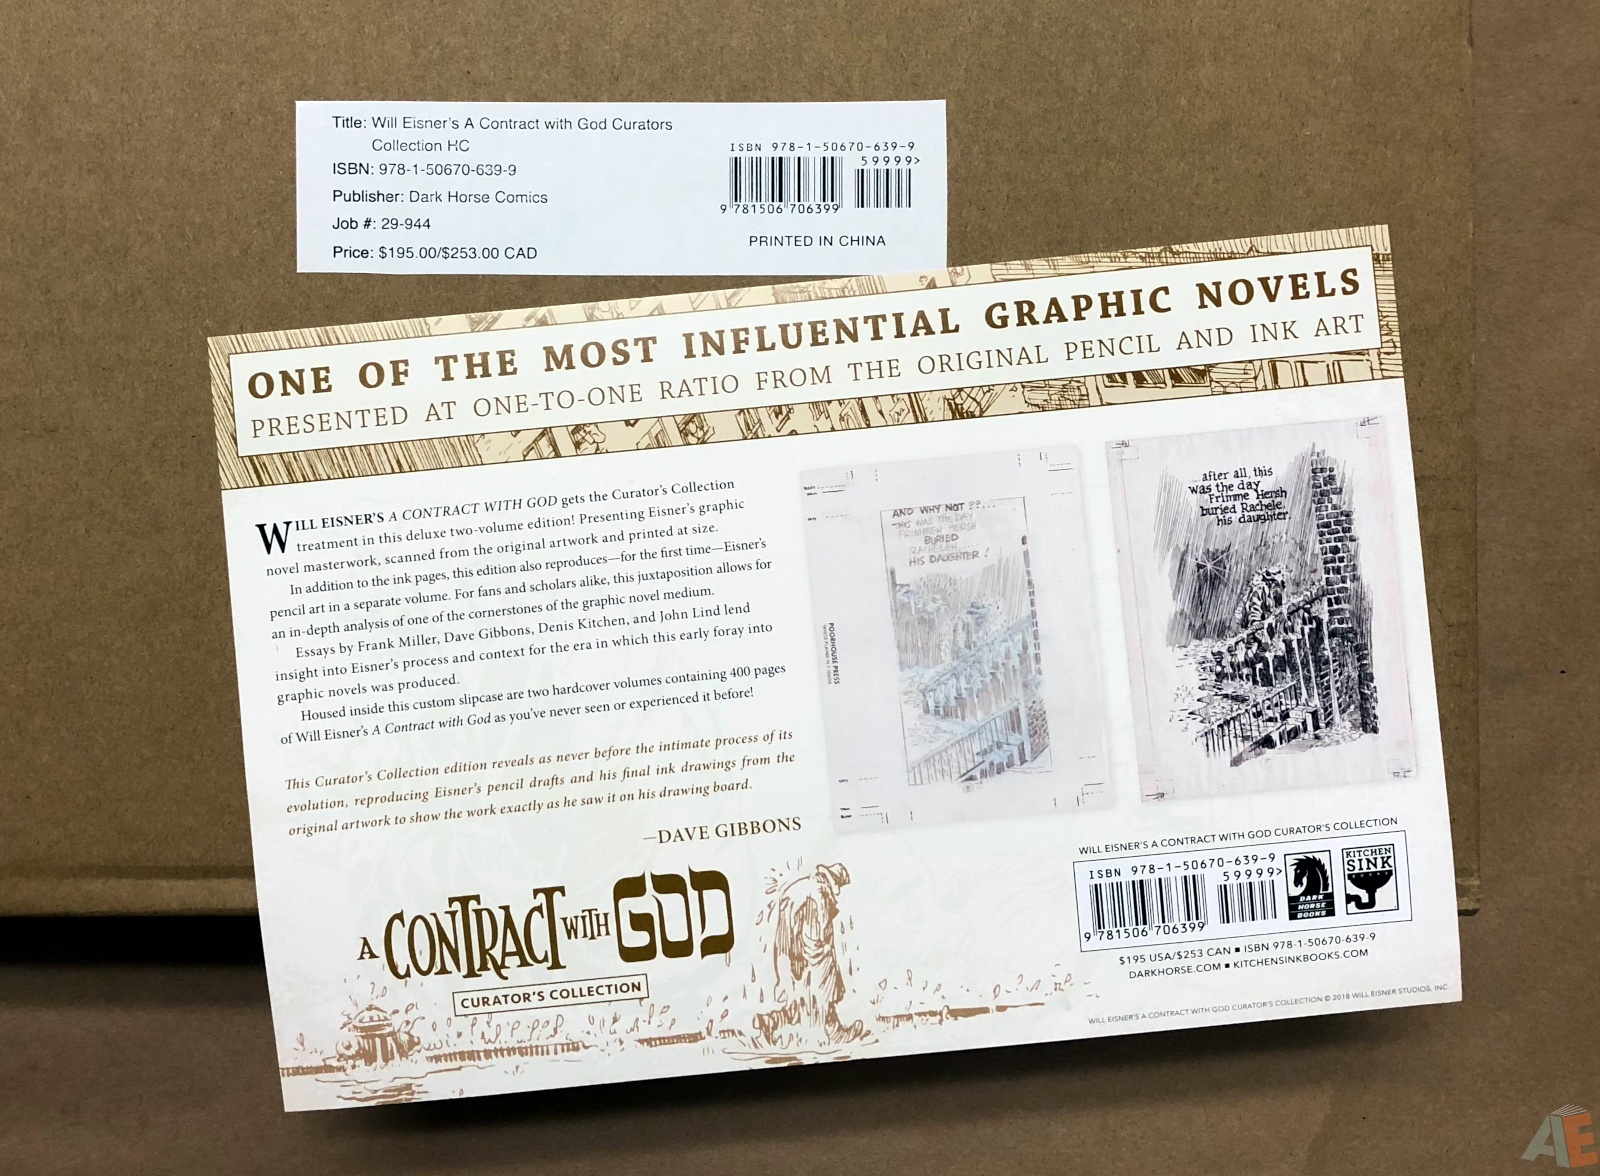 Will Eisner's A Contract with God Curator's Collection